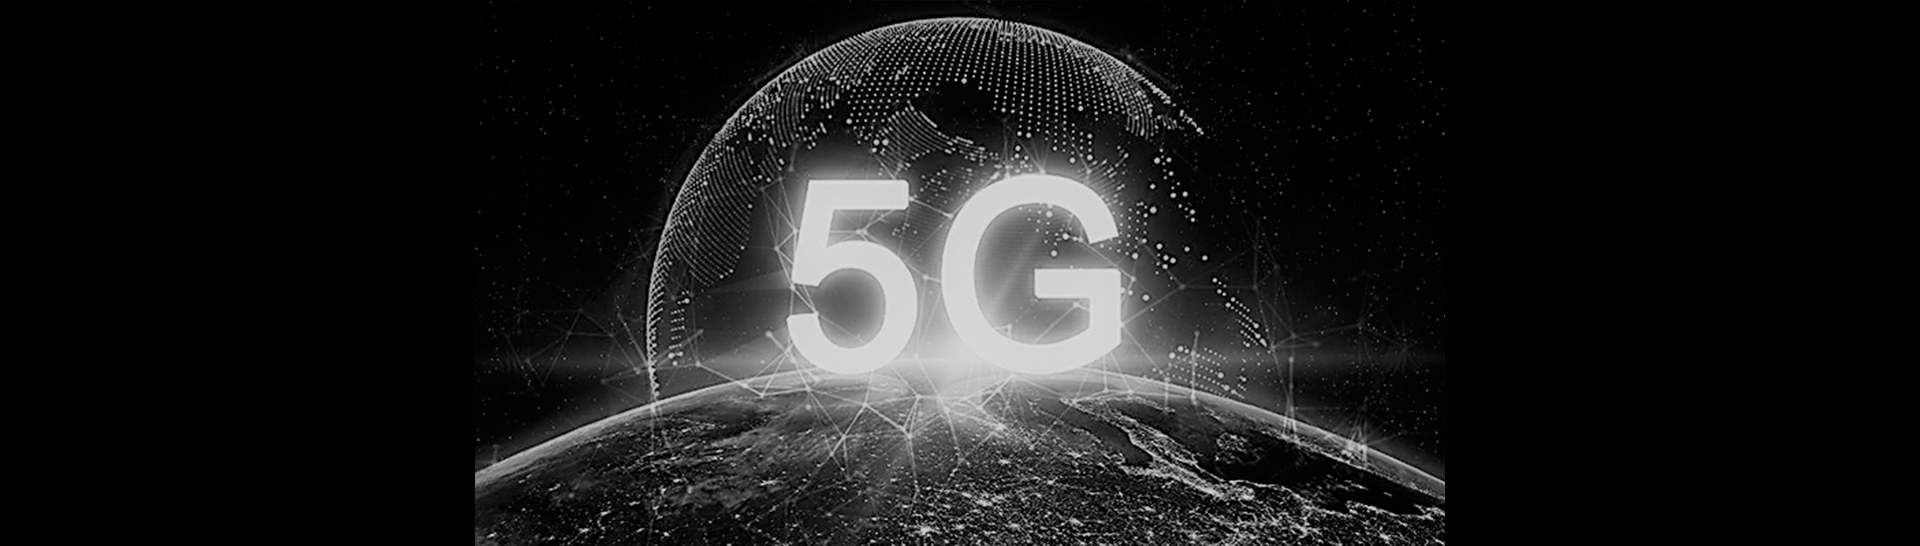 The #1 barrier to 5G adoption resized